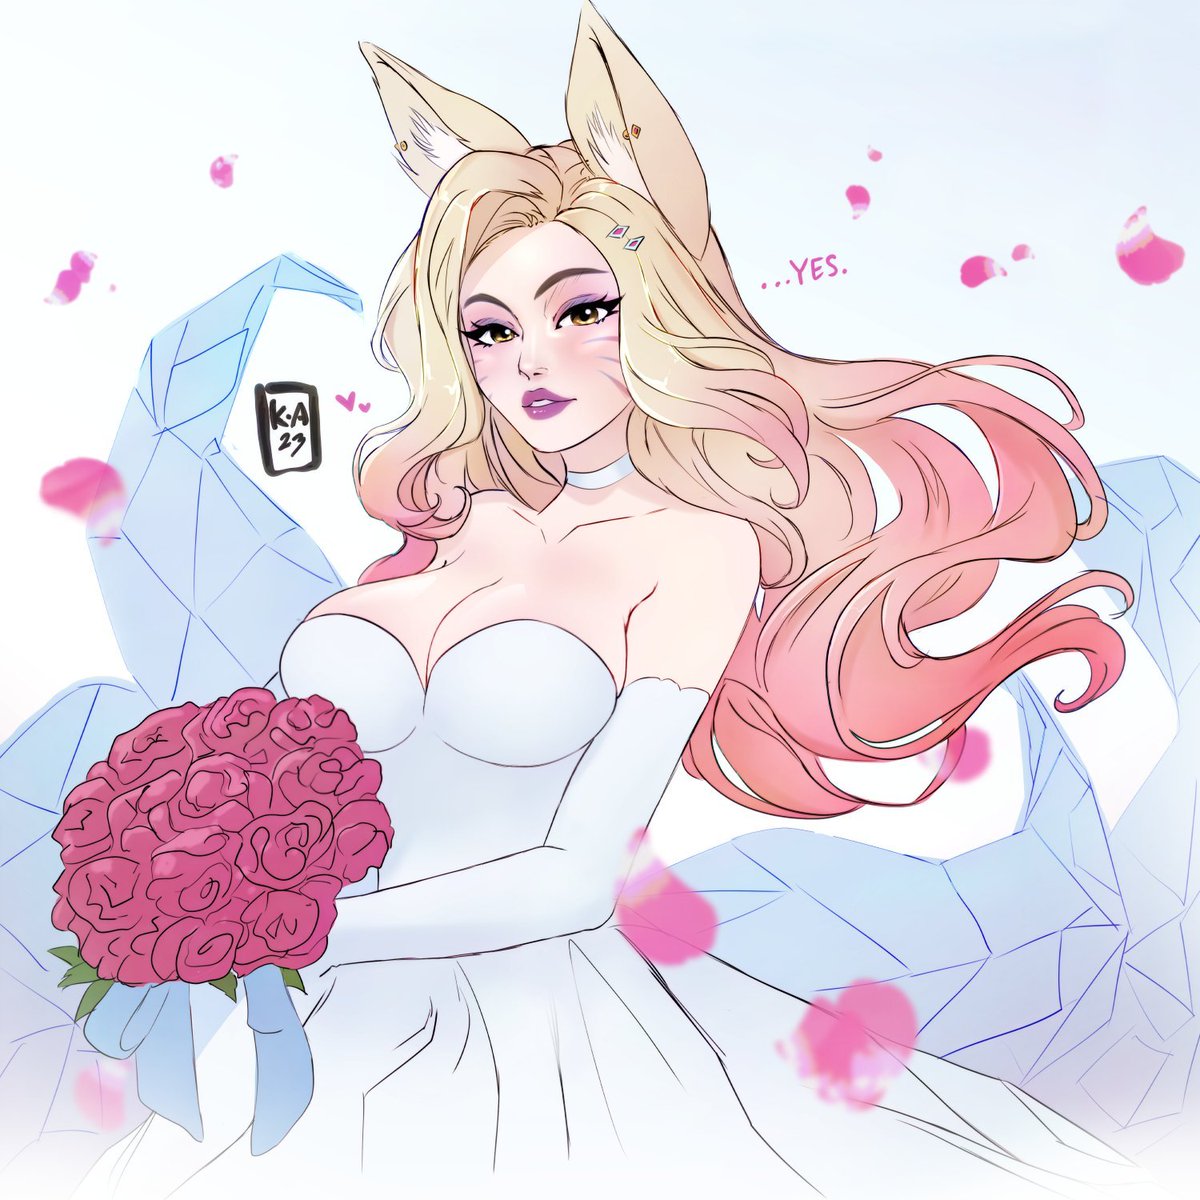 still can't get over how much i love my older draw of wife ahri🥹🥹🔒💘
#ahri #LeagueOfLegends